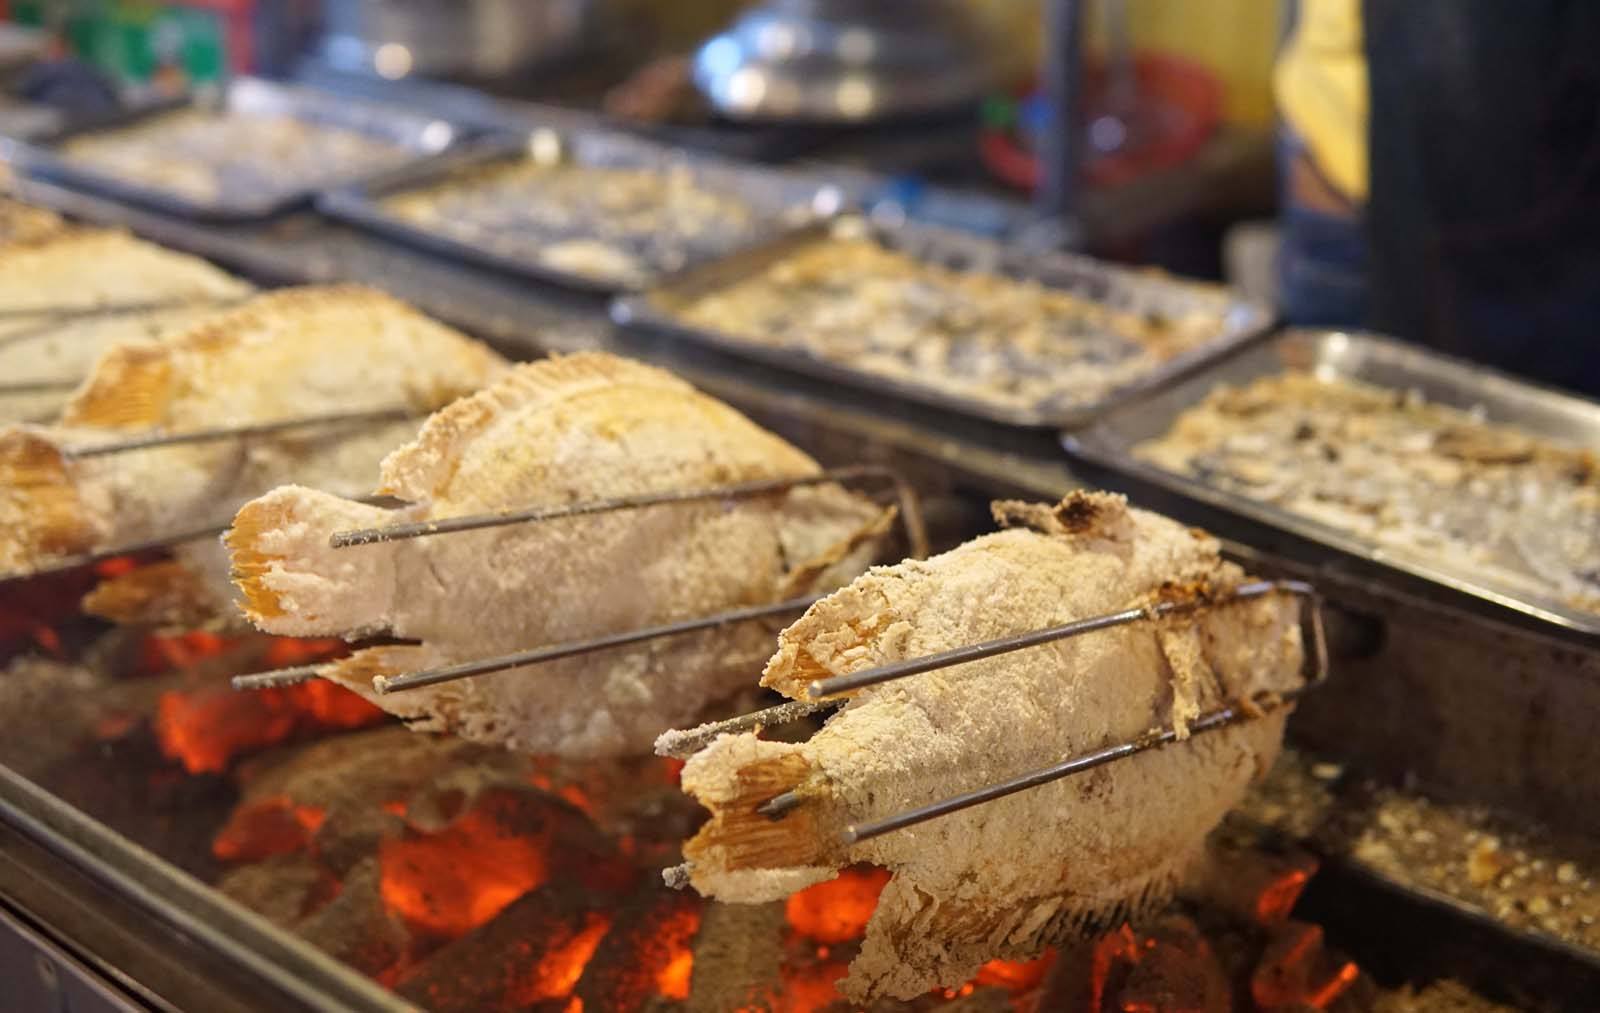 Pla Pao (salt grilled fish) is a staple Bangkok street food at night markets in Thailand